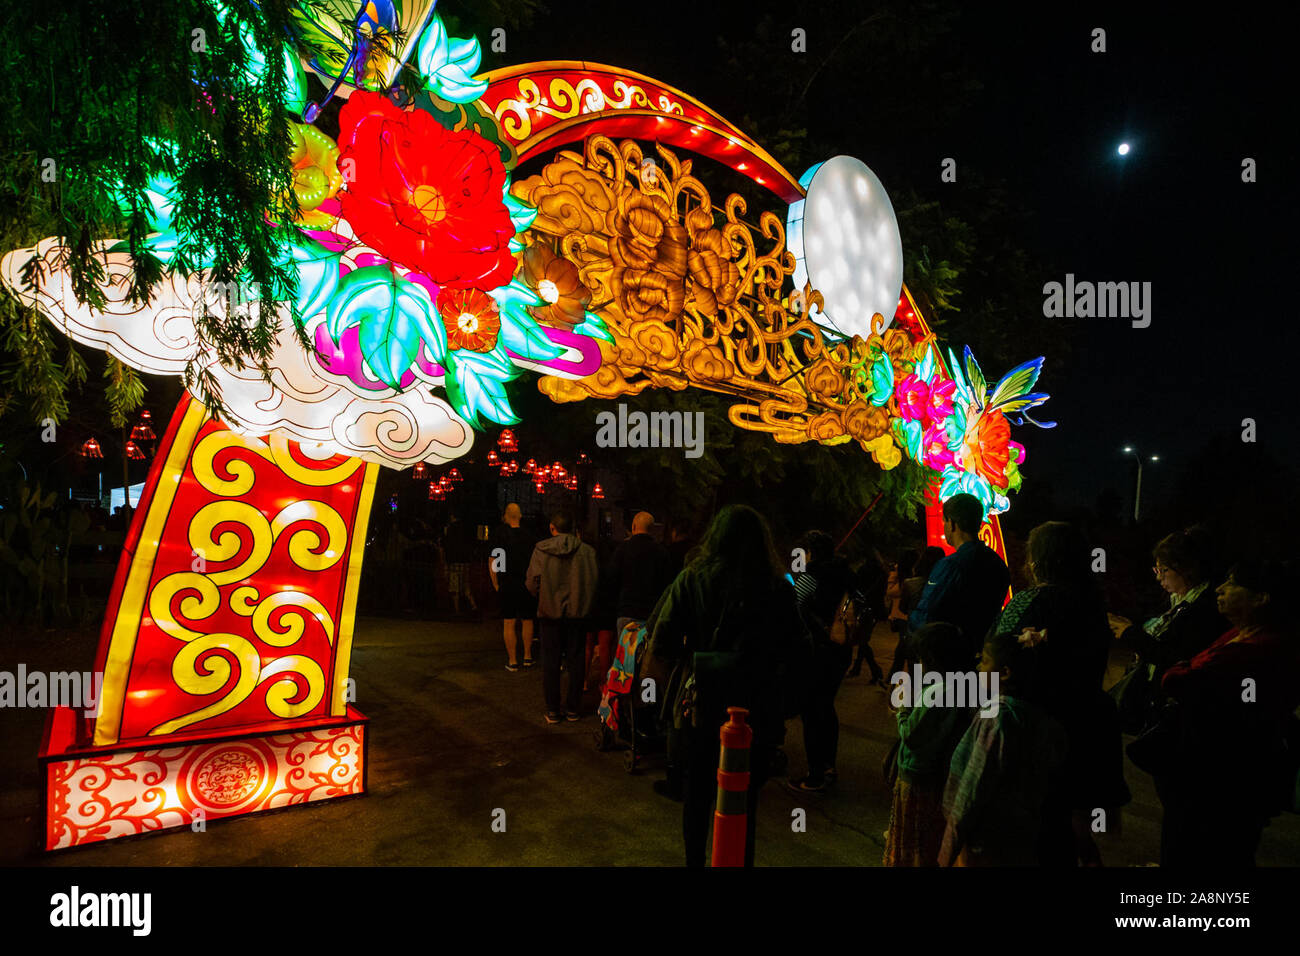 Los Angeles, USA. 9th Nov, 2019. People view light installations during the Moonlight Forest Magical Lantern Art Festival at the Los Angeles County Arboretum and Botanic Garden in Los Angeles, the United States, Nov. 9, 2019. Credit: Qian Weizhong/Xinhua/Alamy Live News Stock Photo